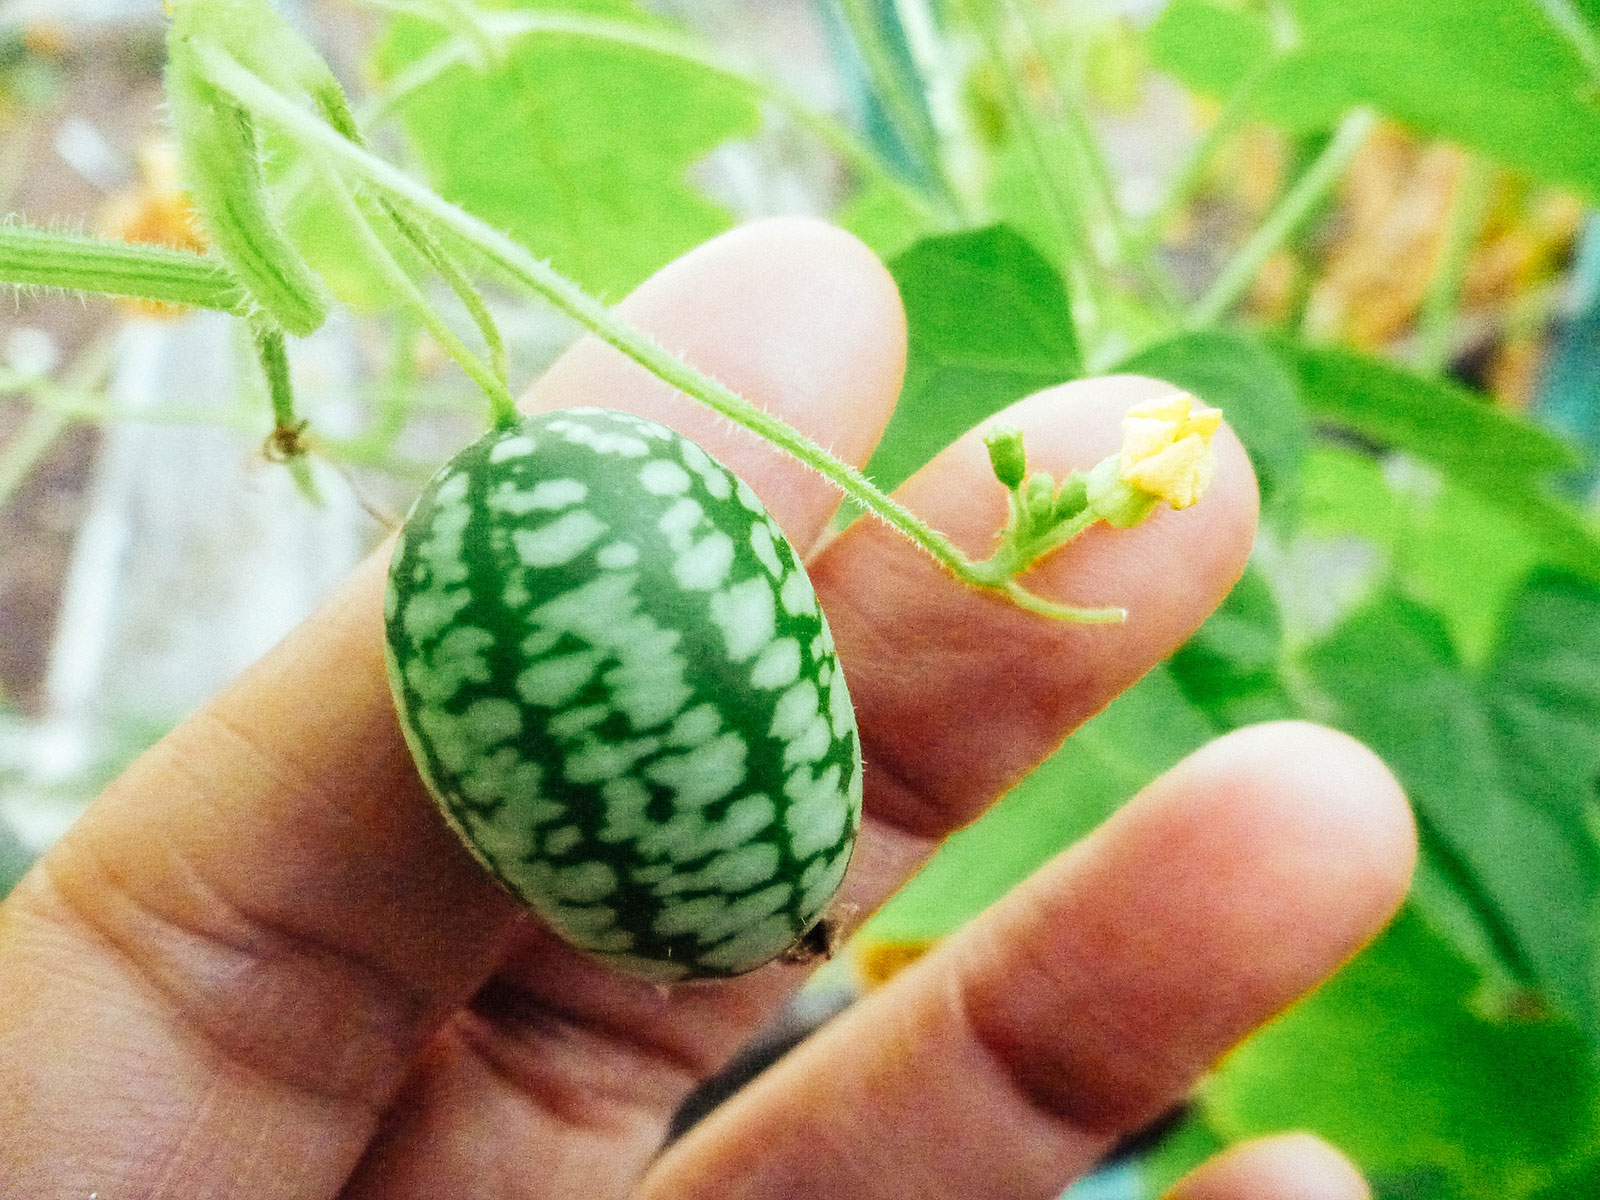 Hand placed behind a small Mexican sour gherkin (cucamelon) fruit on a vine